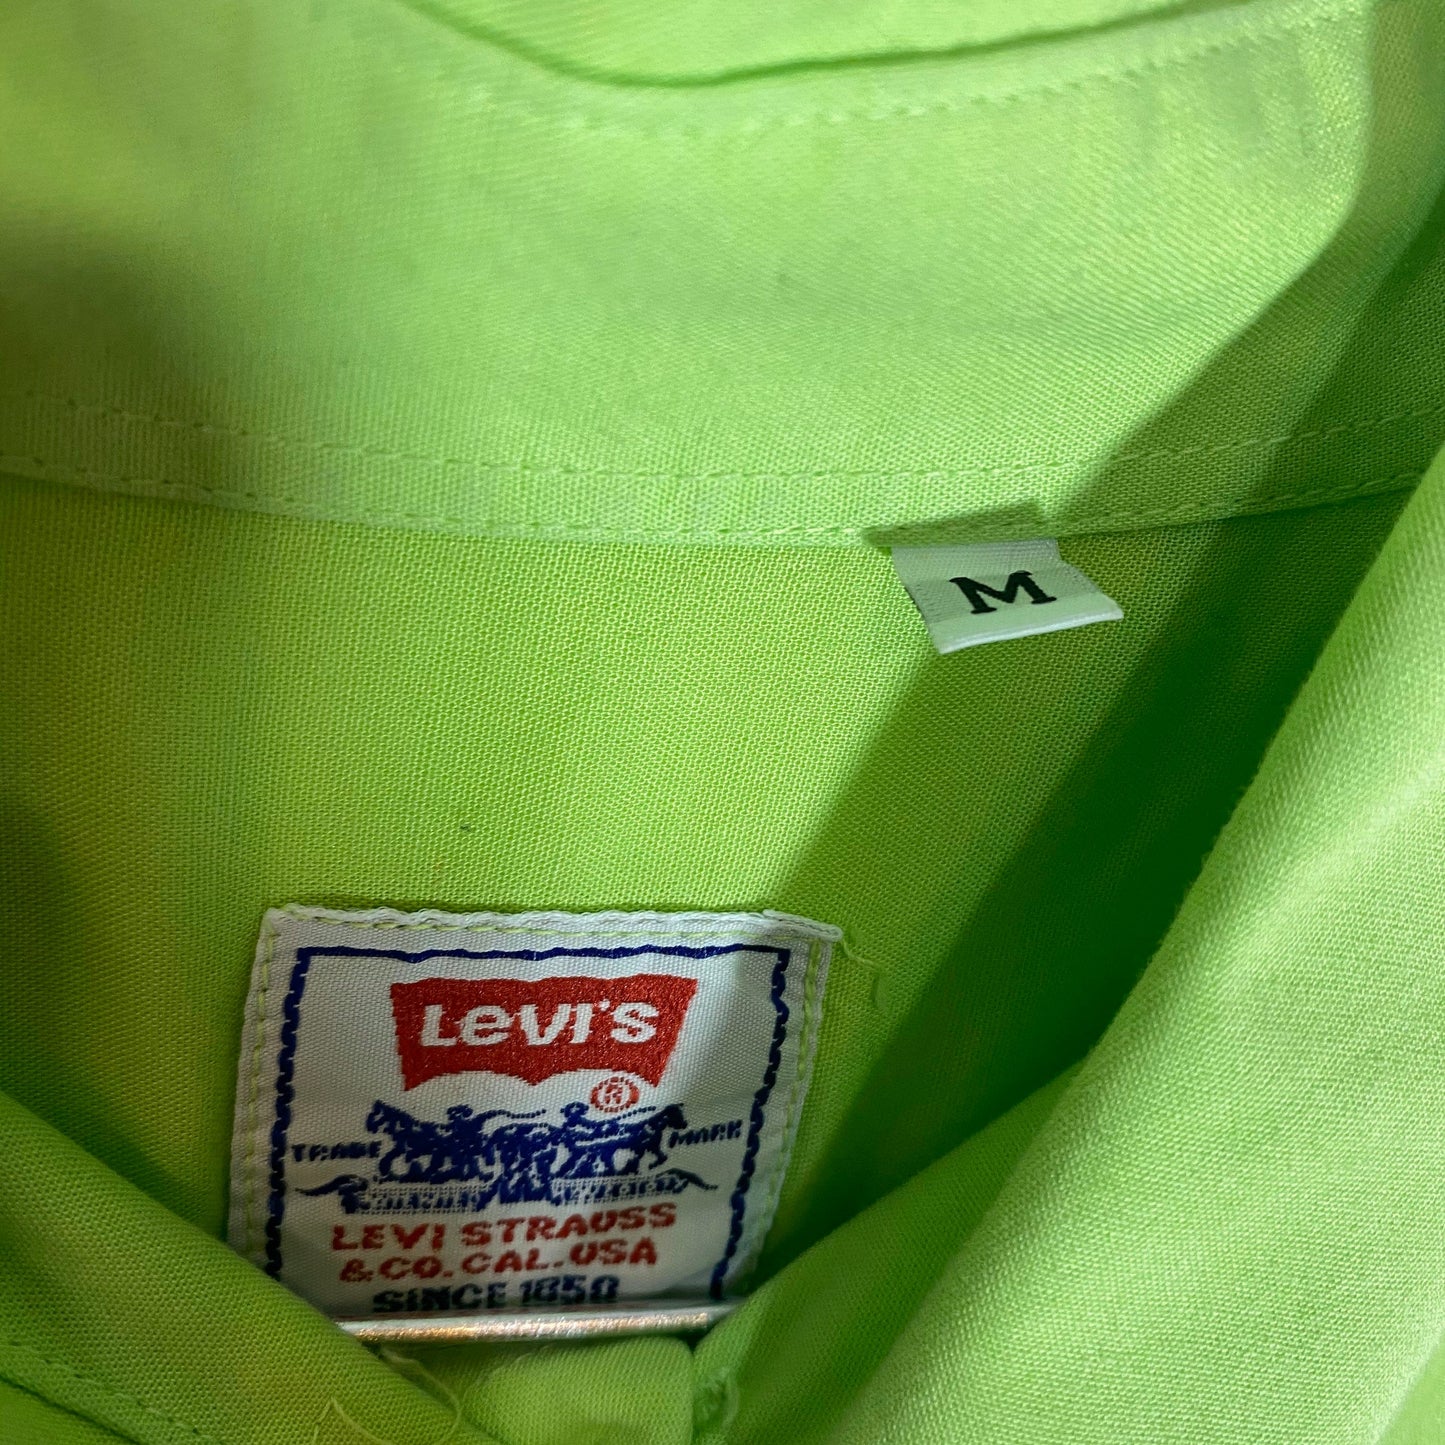 Levi’s short sleeved bright colors shirts coming in green and yellow, 1980 NOS with tags